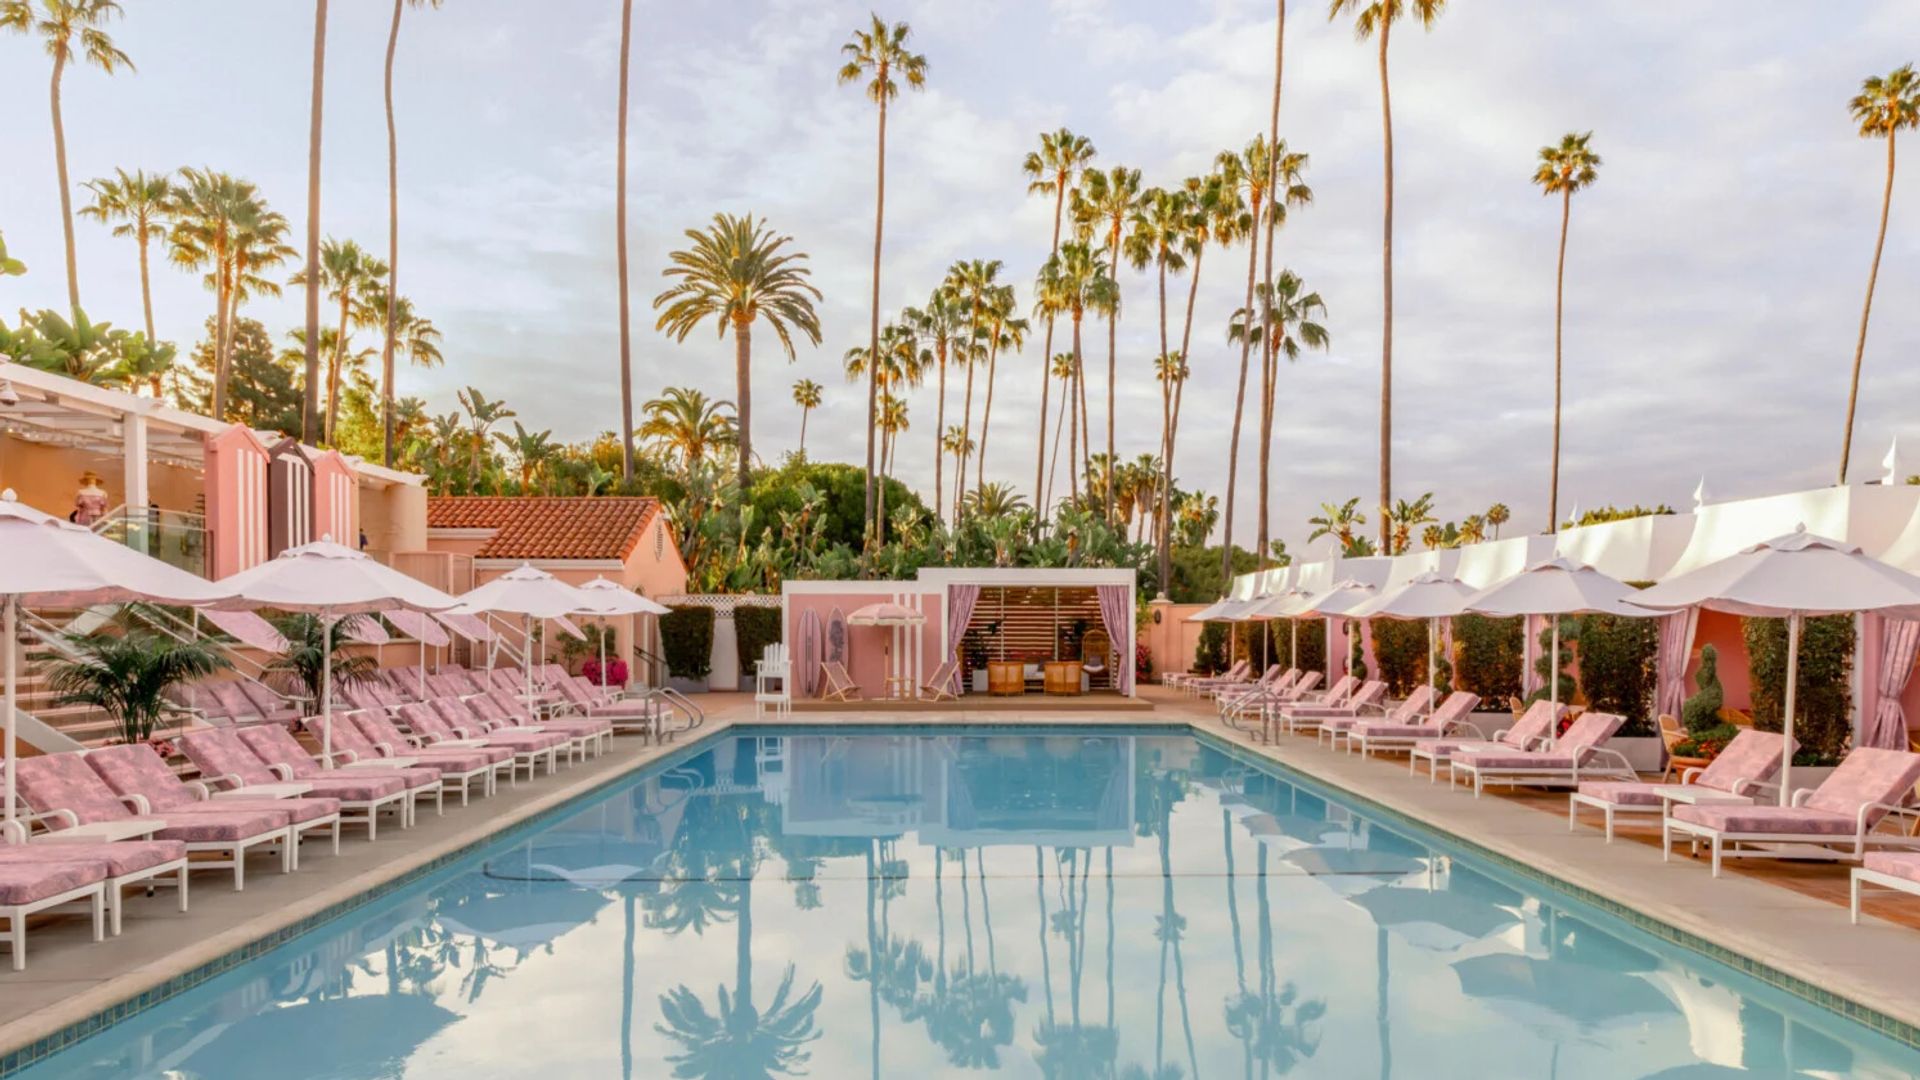 Inside the world-famous Beverly Hills hotel frequented by Marilyn Monroe, Princess Margaret and more